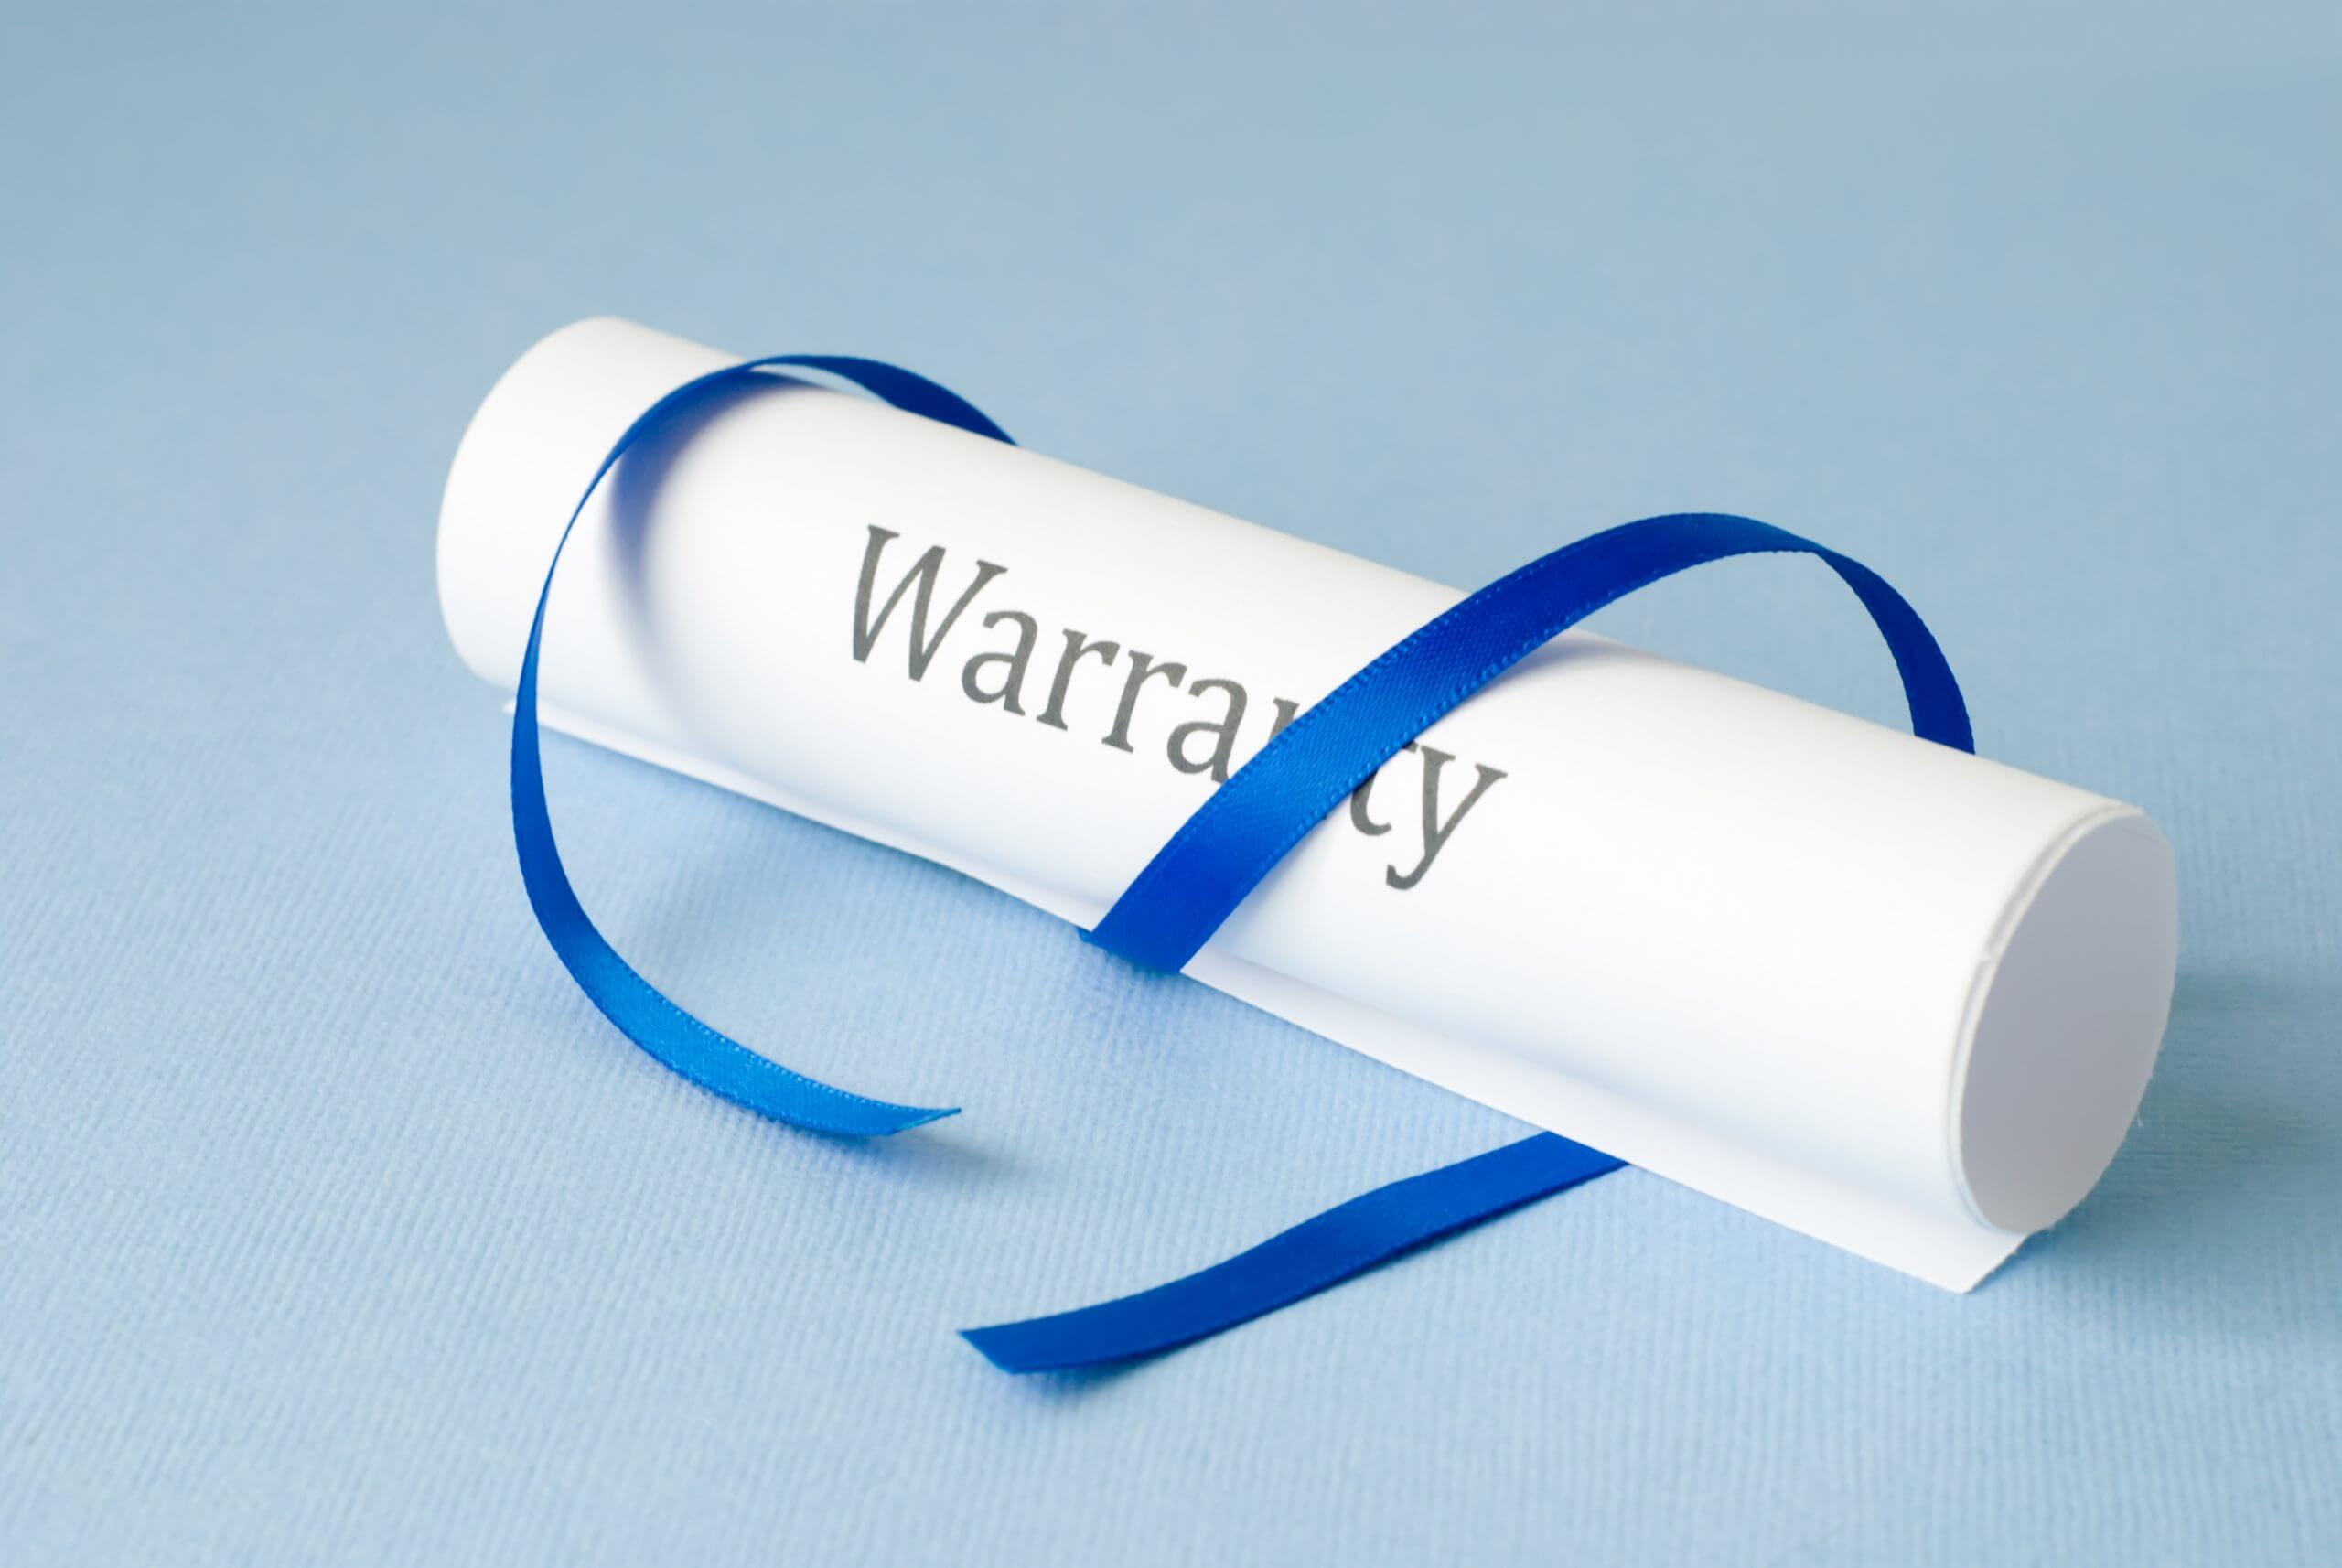 warranty printed on a rolled paper